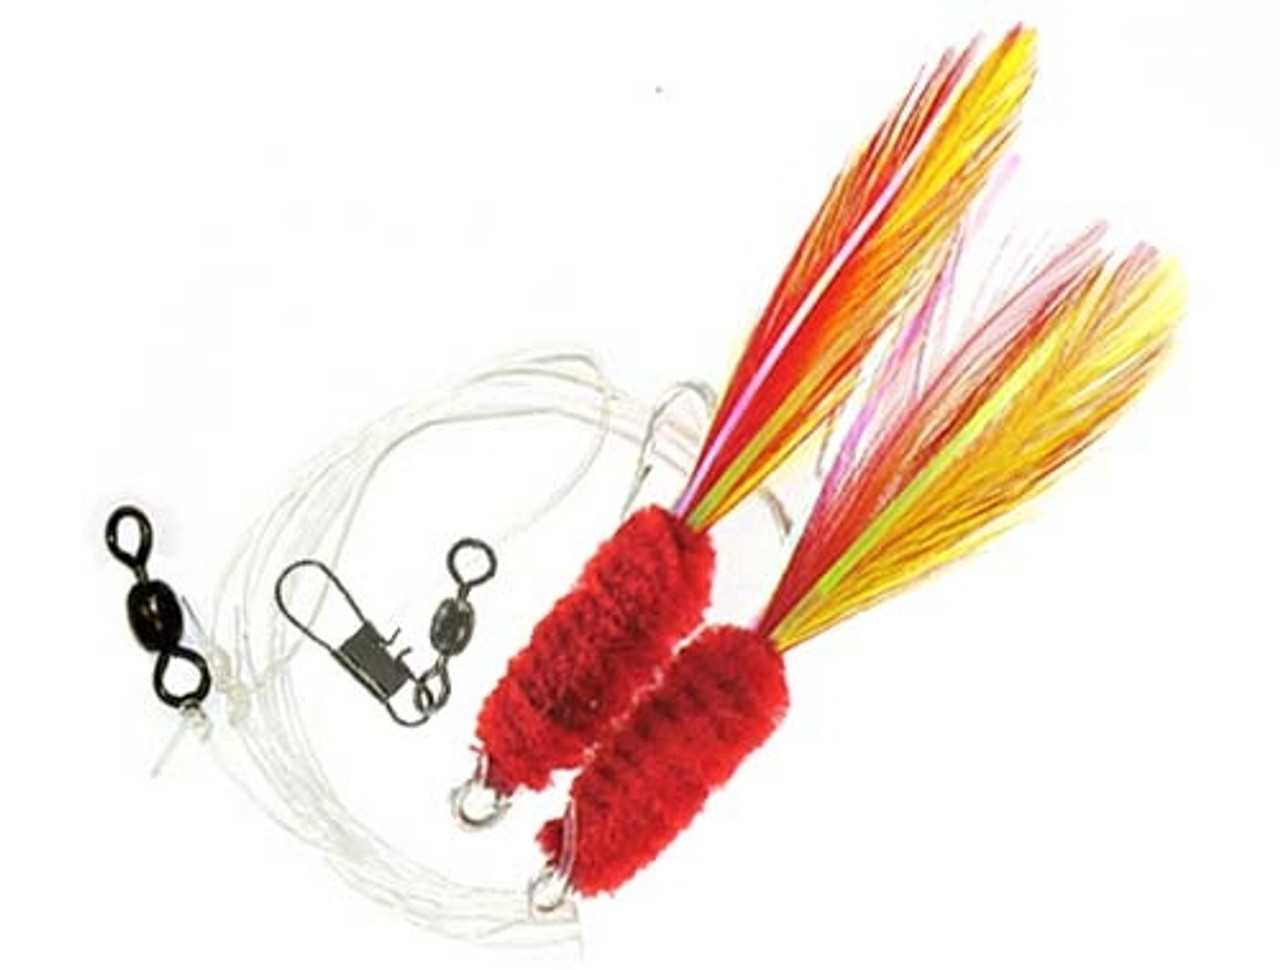 10 pieces Shrimp Fly Rigs 5/0 Hook 5 White & 5 Red Yellow Rockfish Baits Combo 